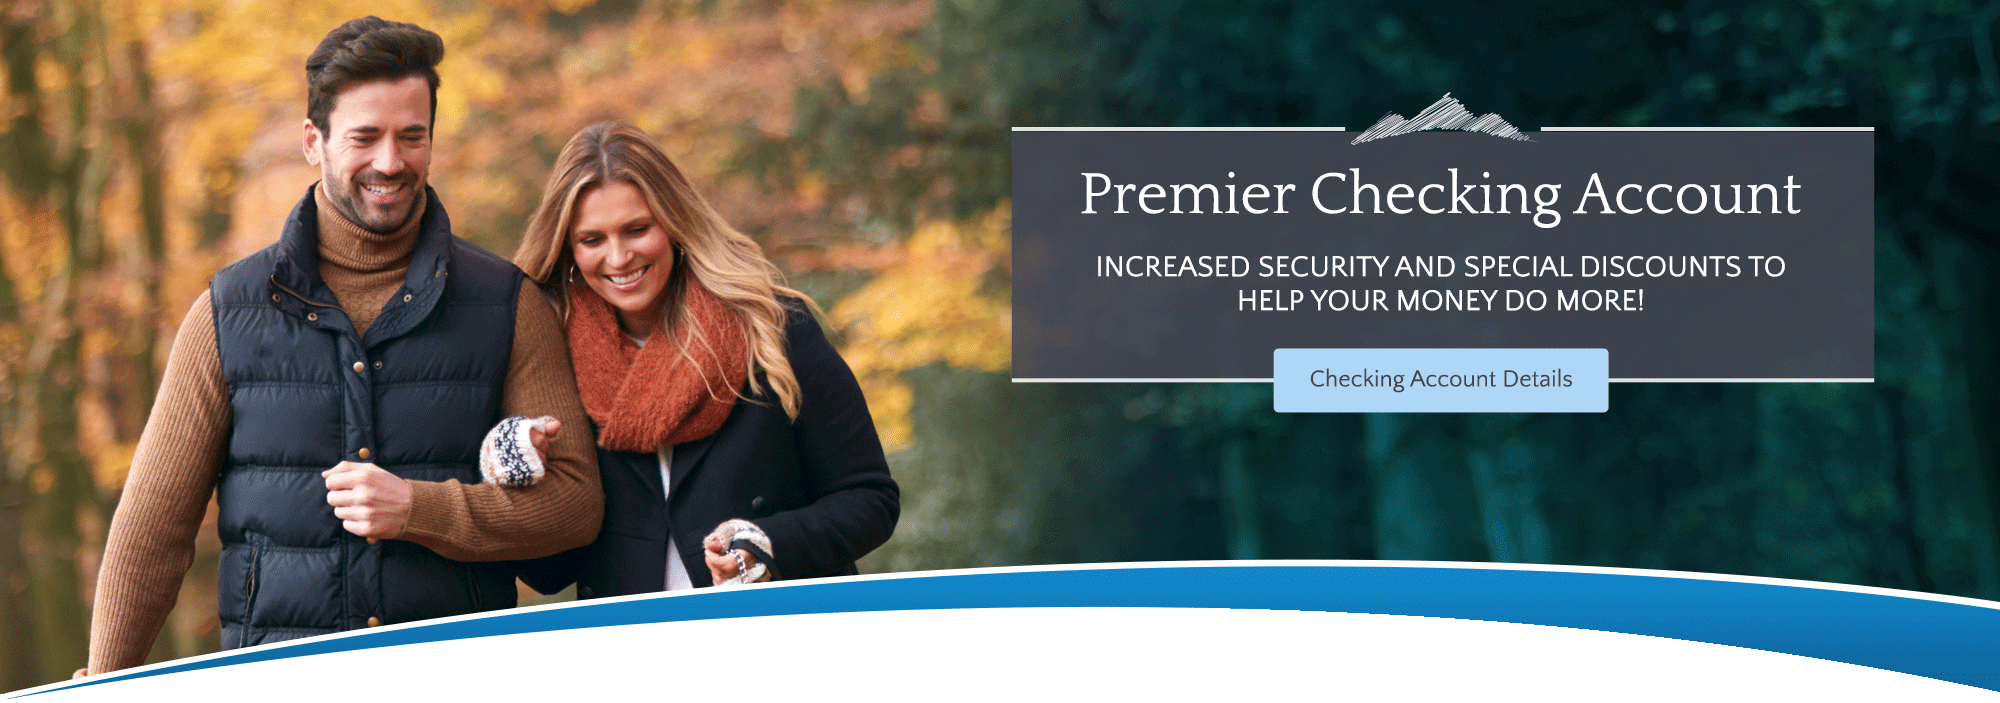 Premier Checking Account Increased security and special discounts to help your money do more! checking account details